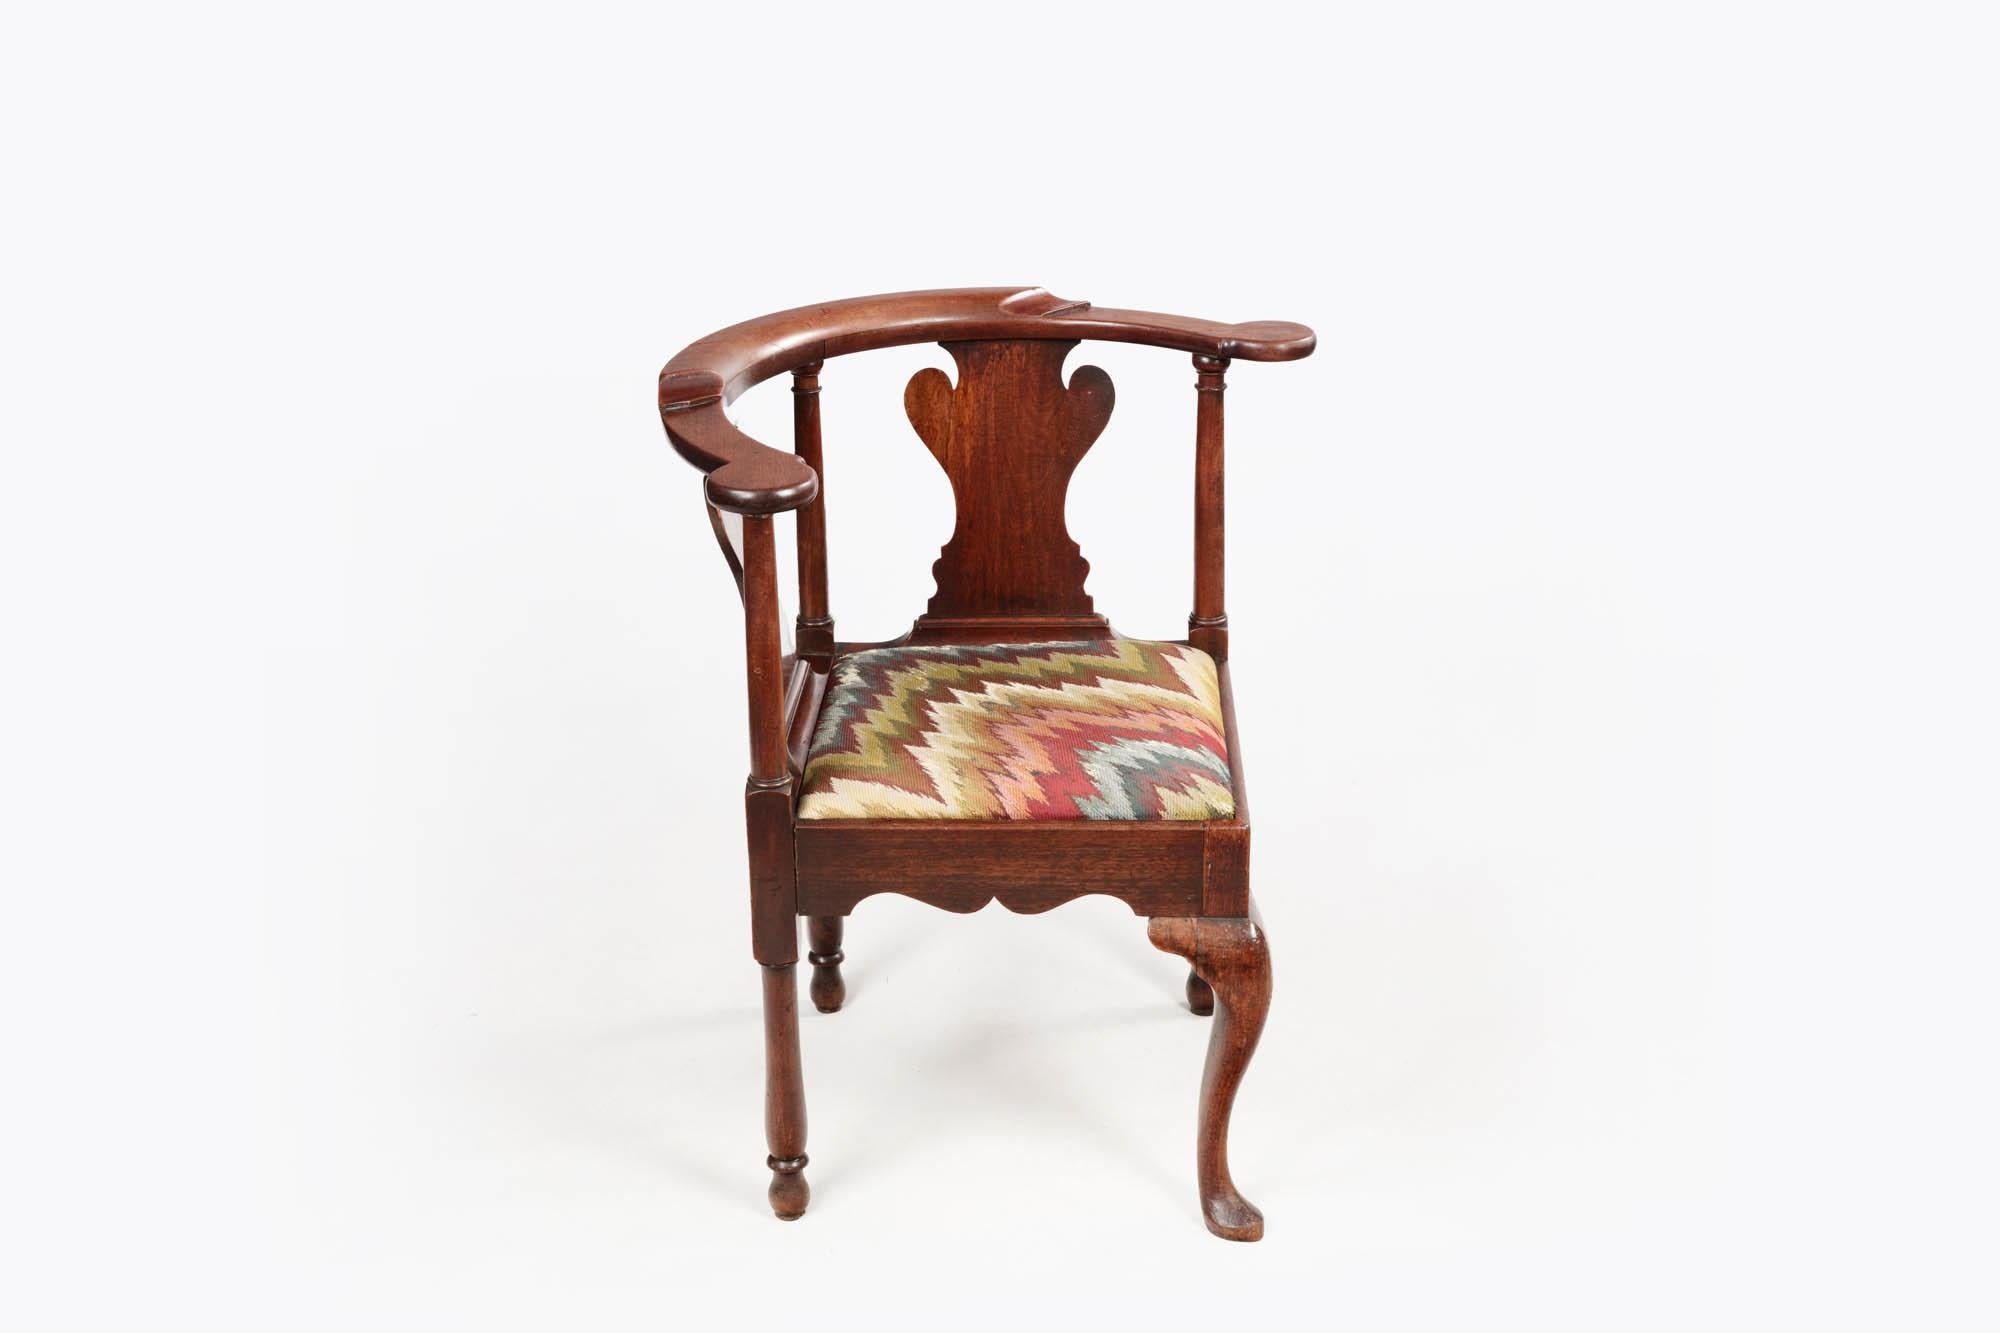 19th Century mahogany corner chair with urn back slats, upholstered seat, three-pillar legs & cabriole leg with pad foot to the front.